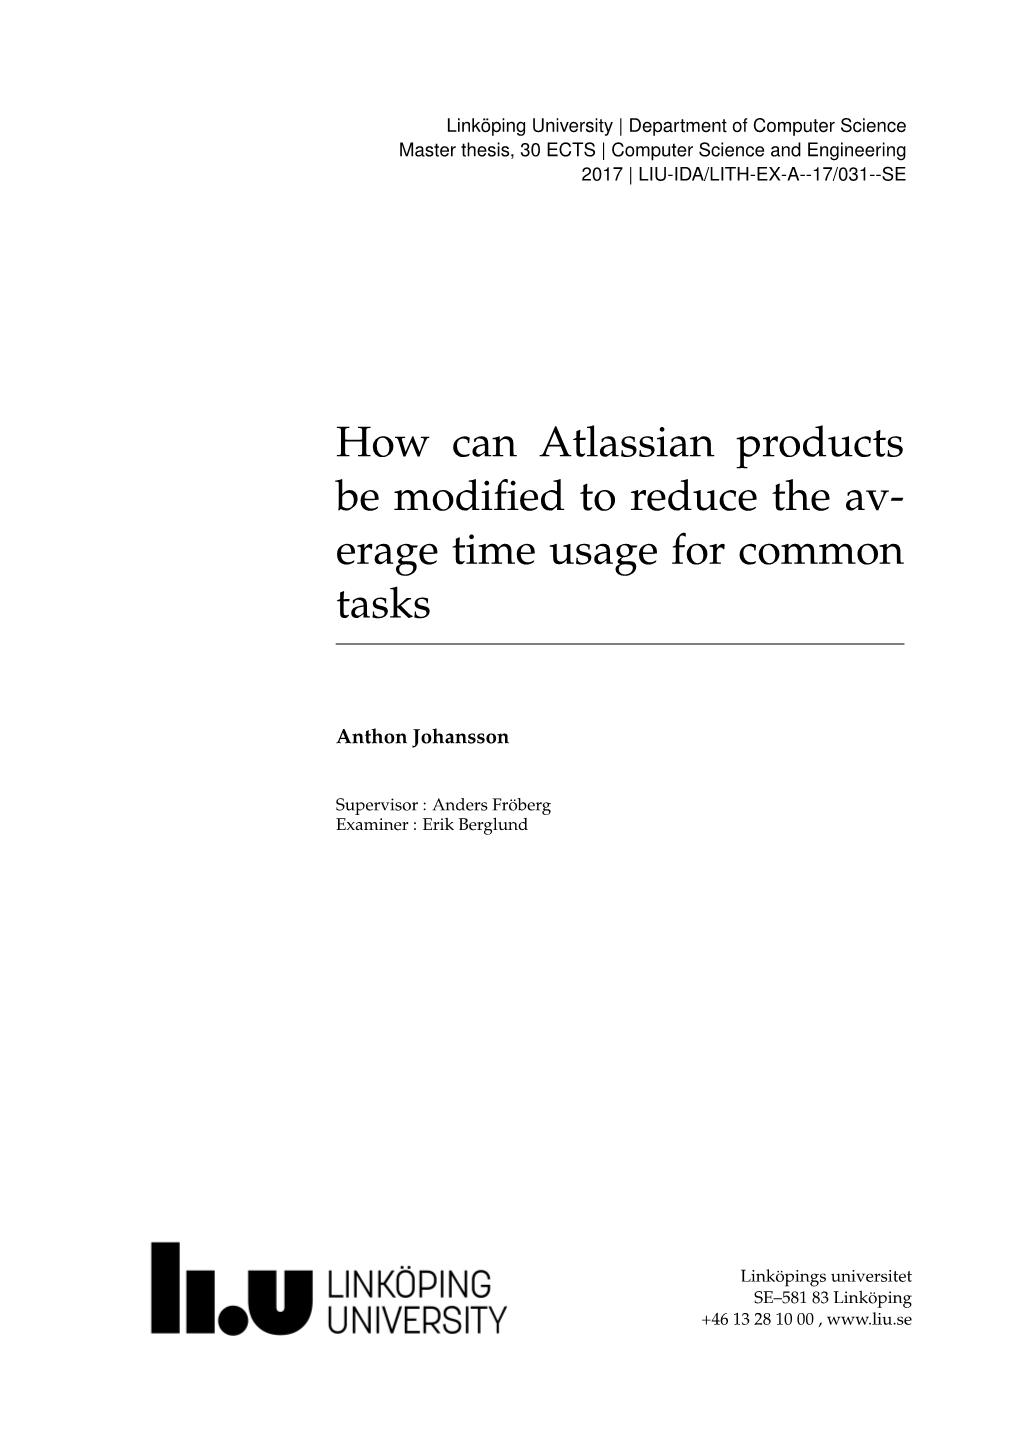 How Can Atlassian Products Be Modified to Reduce the Av